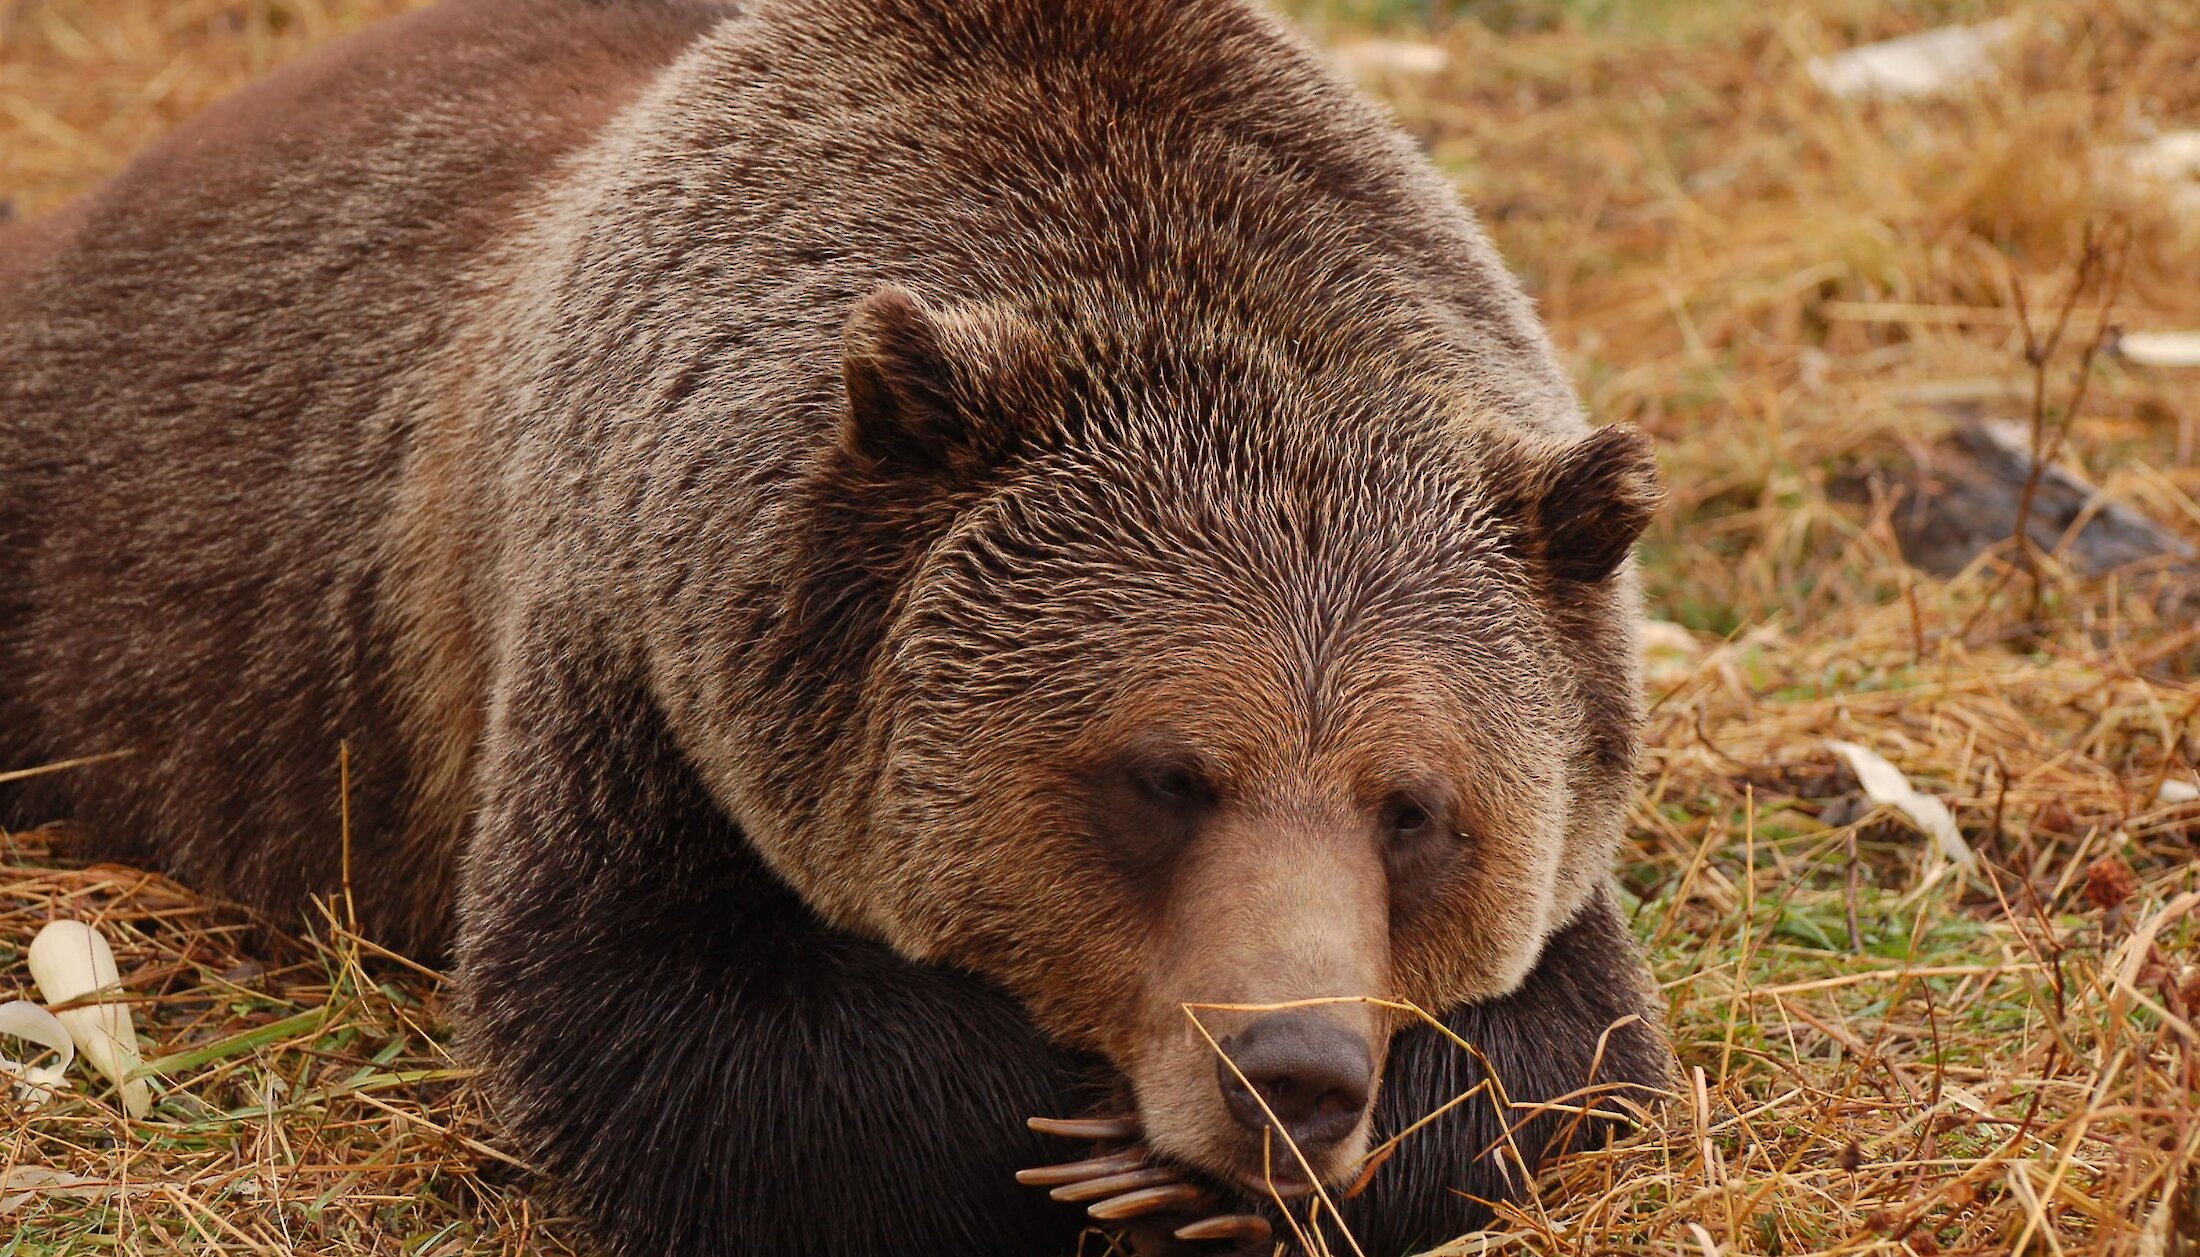 Boo the Grizzly Bear